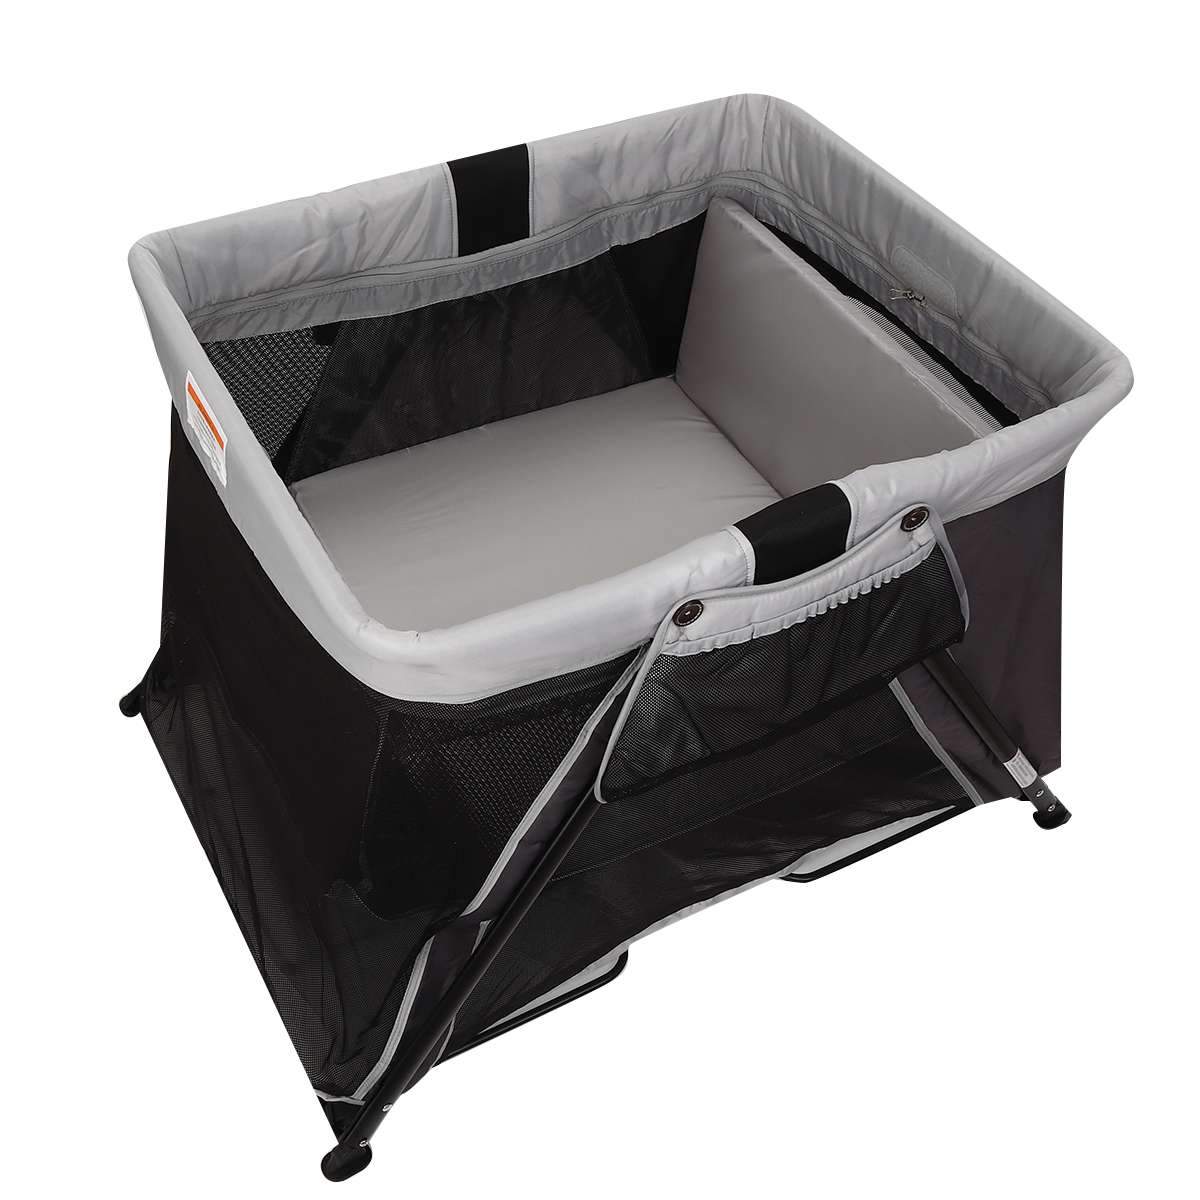 Large Spacious Portable Travel Baby Crib - Westfield Retailers